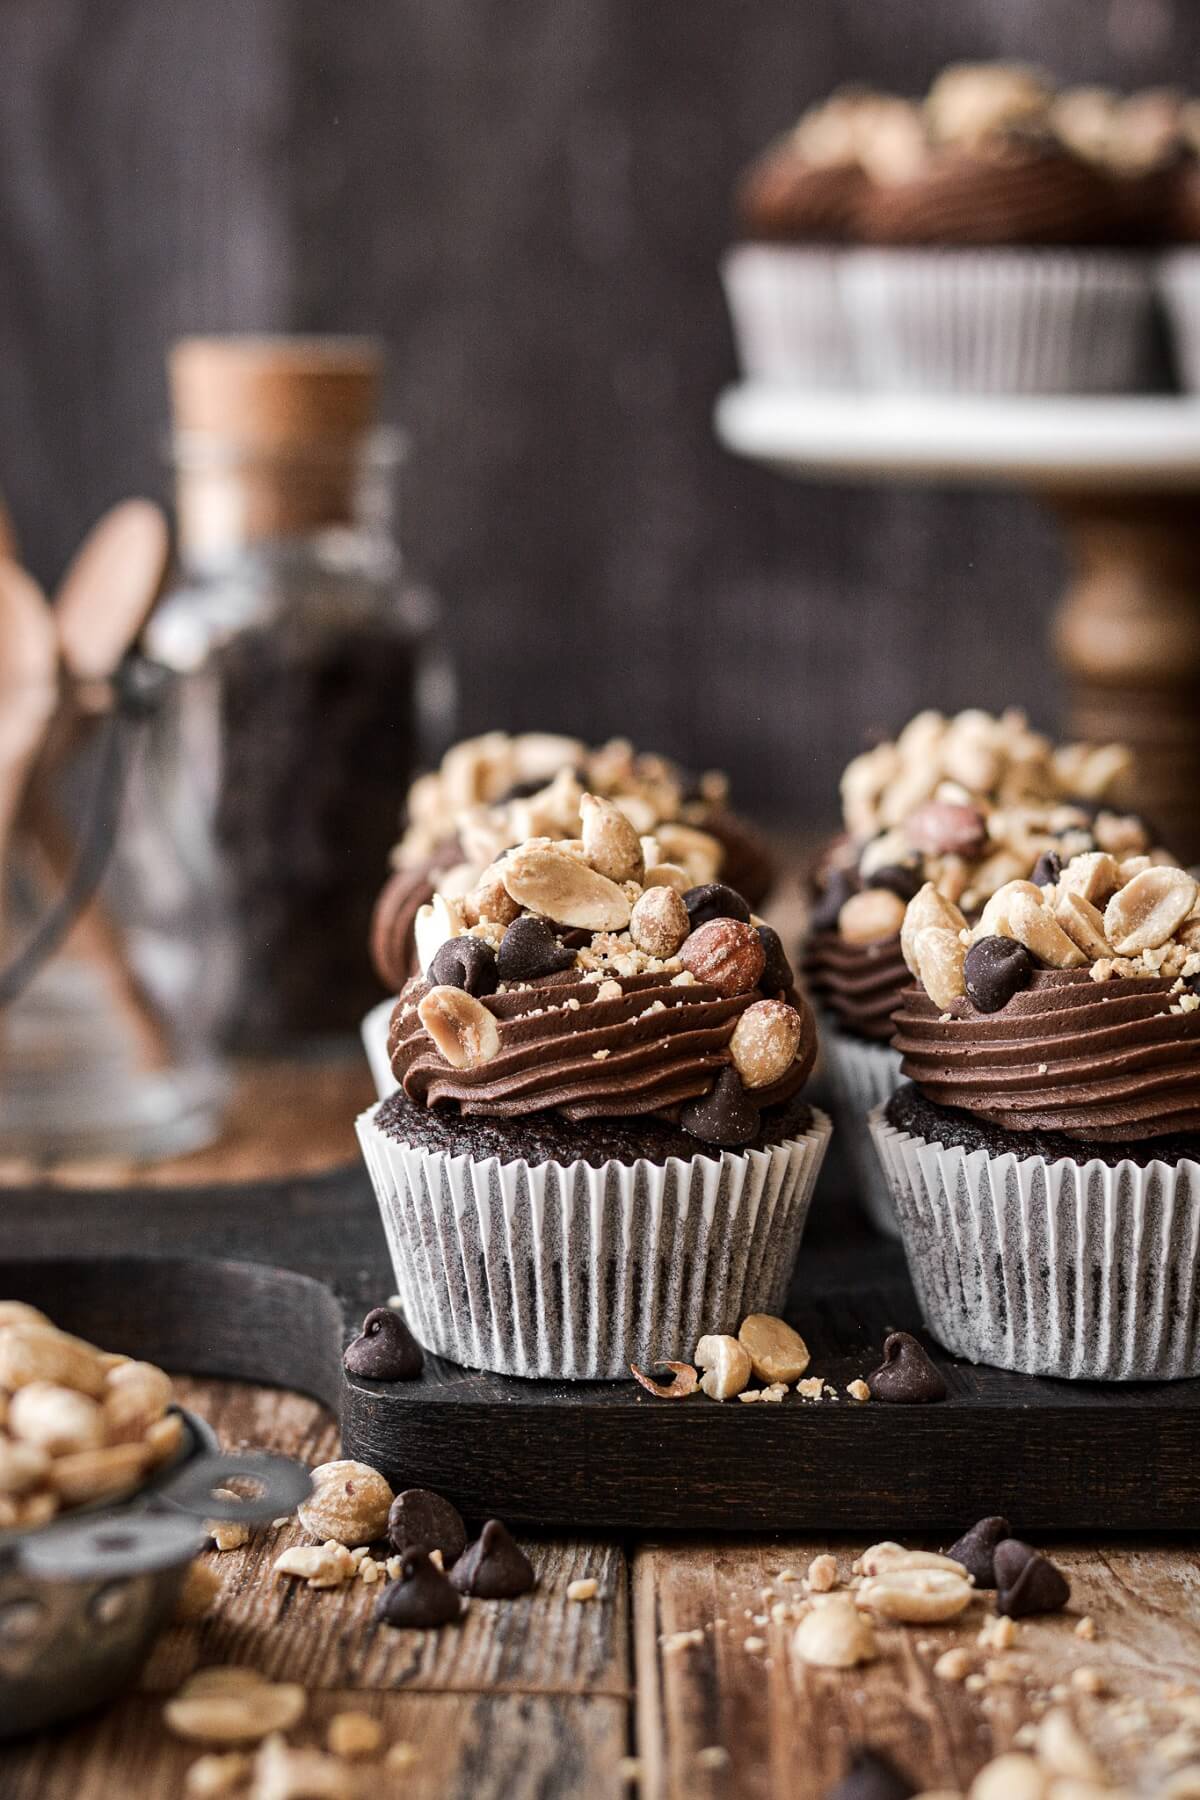 Chocolate peanut cluster cupcakes, with salted peanuts and chocolate chips on top.